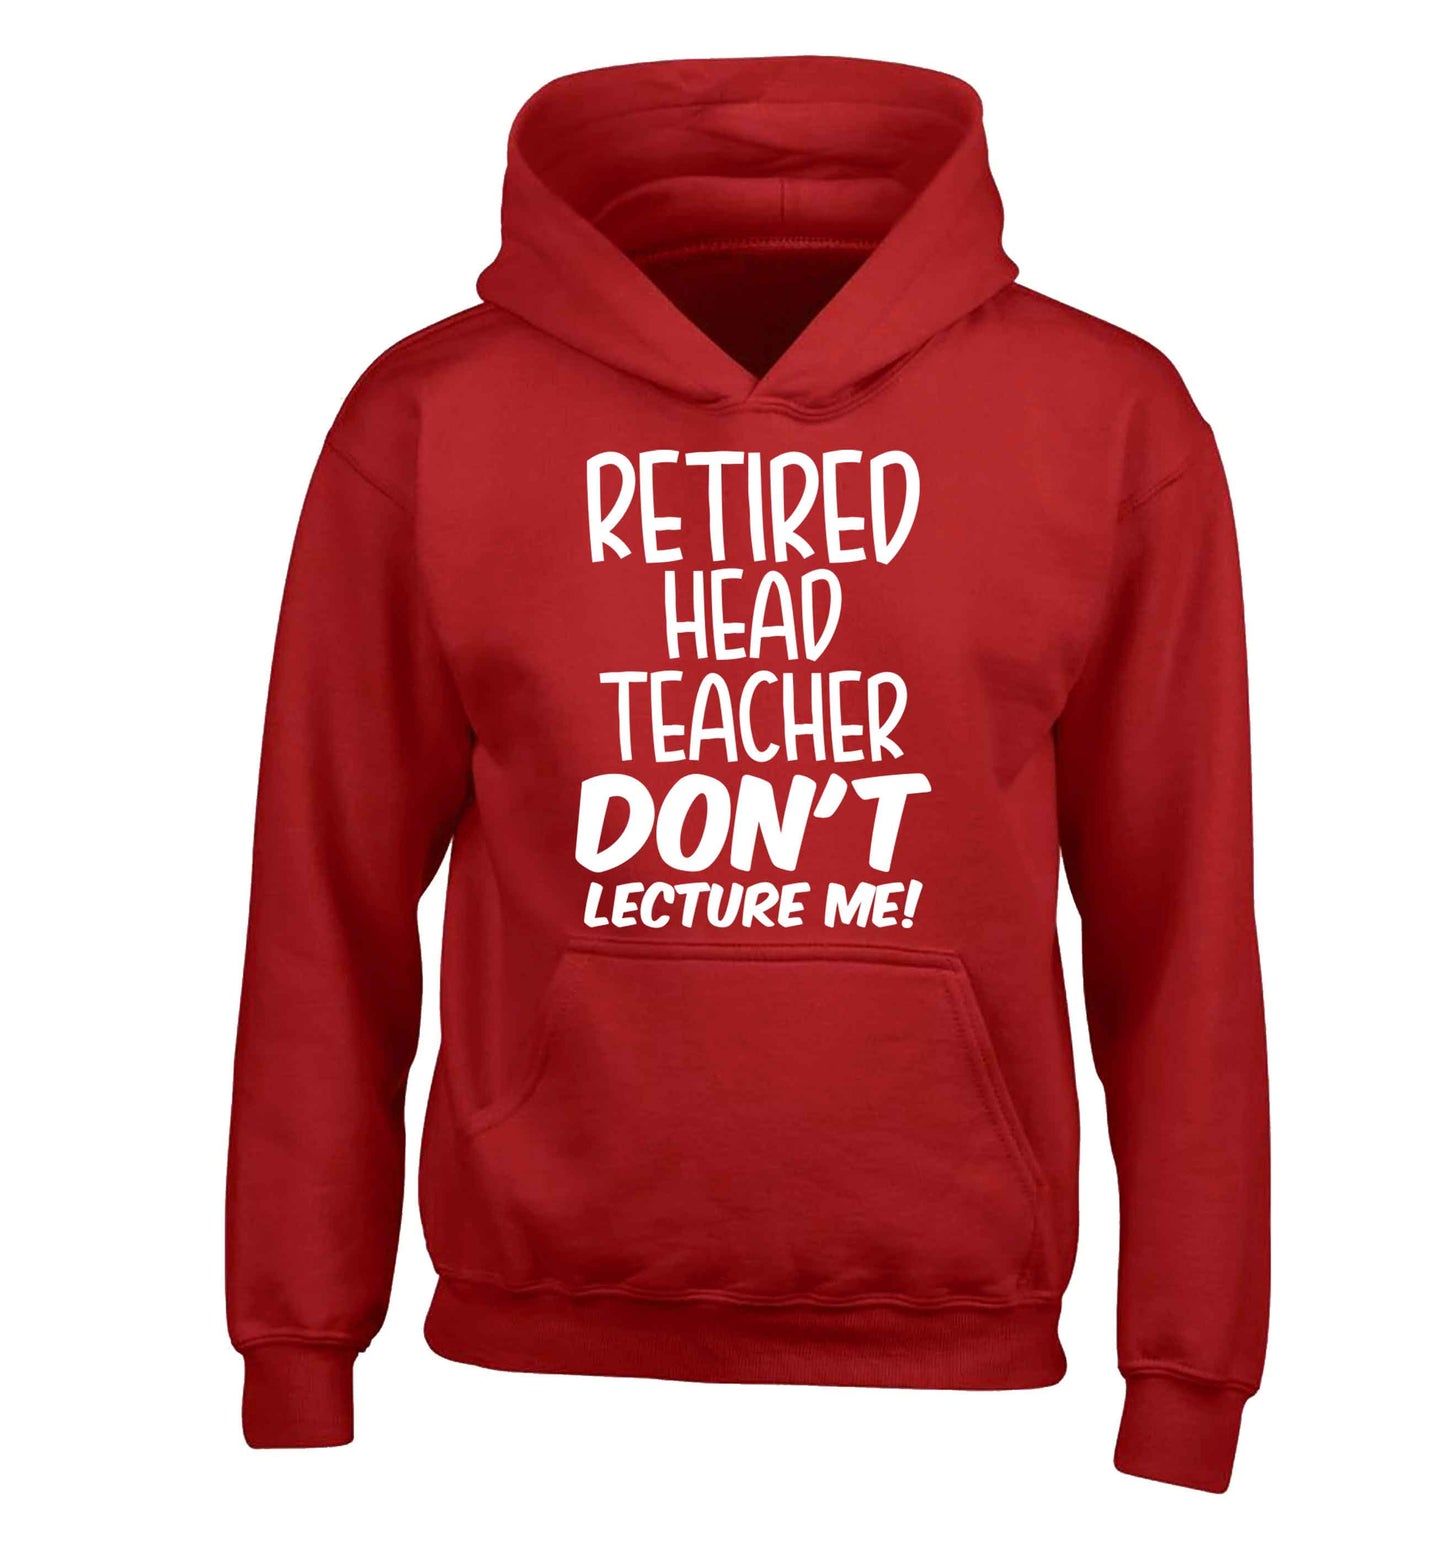 Retired head teacher don't lecture me! children's red hoodie 12-13 Years